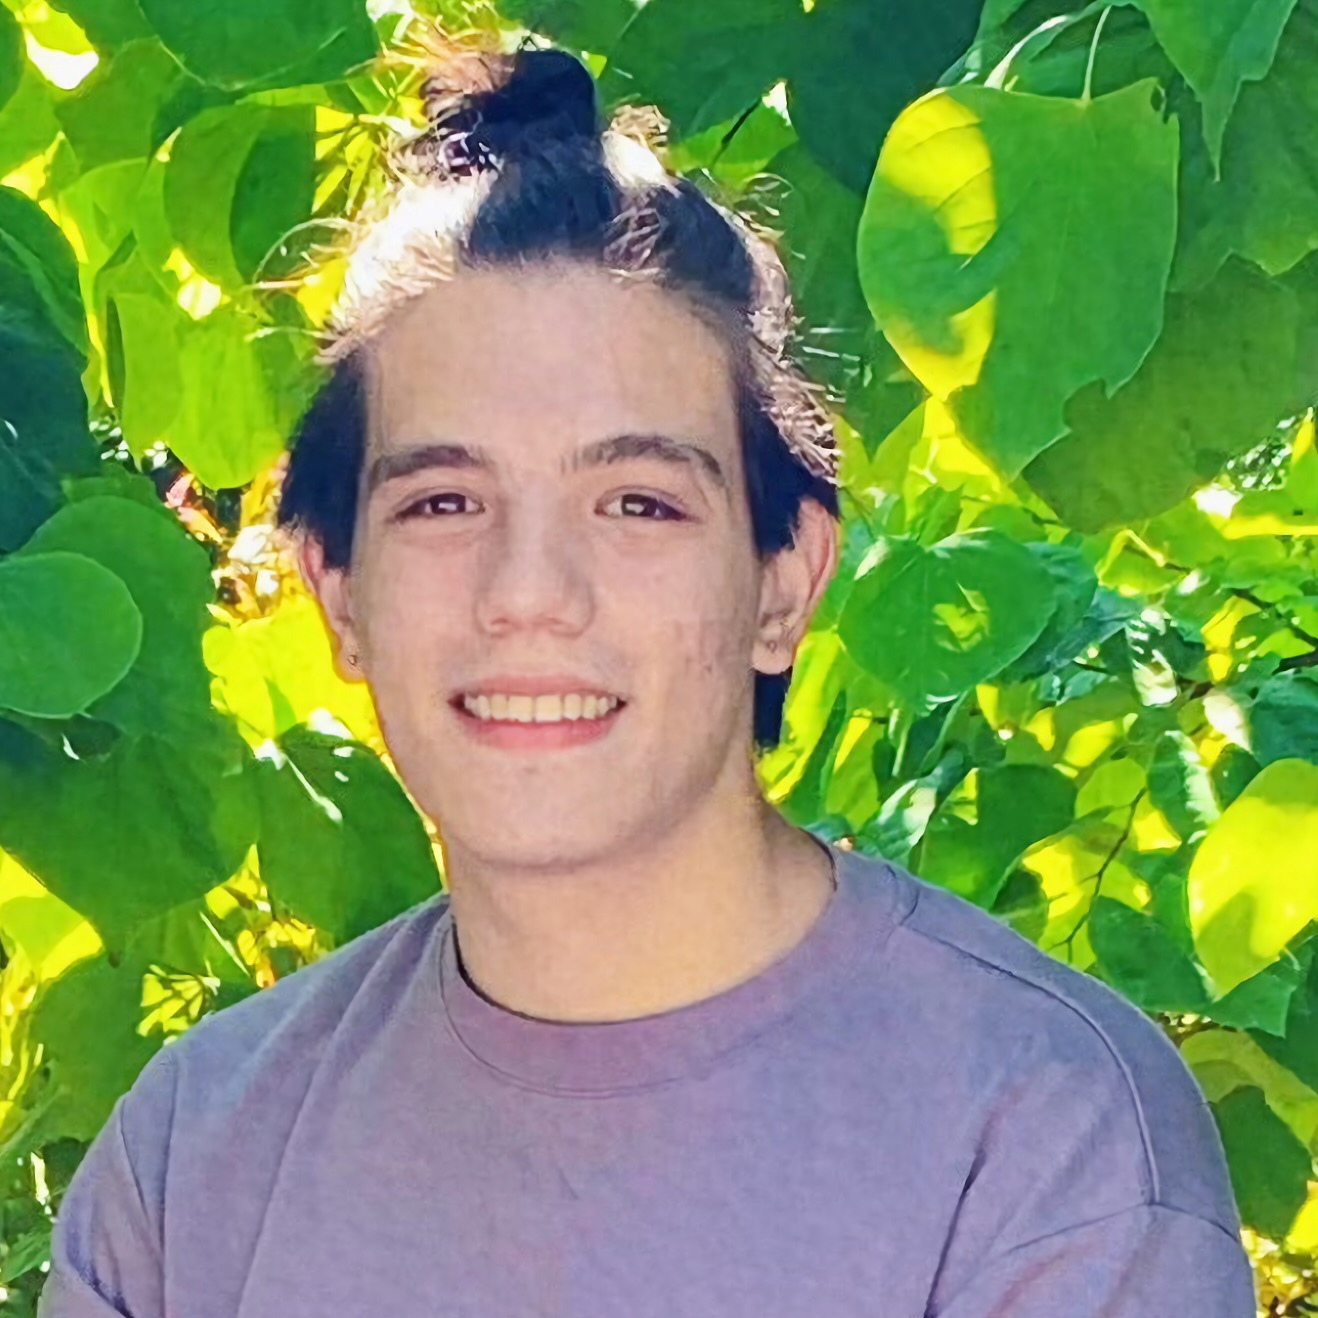 Sebastián Mancha, PhD student in Linguistics, smiling at the camera, standing in front of the bright green leaves of a tree in a DC garden.